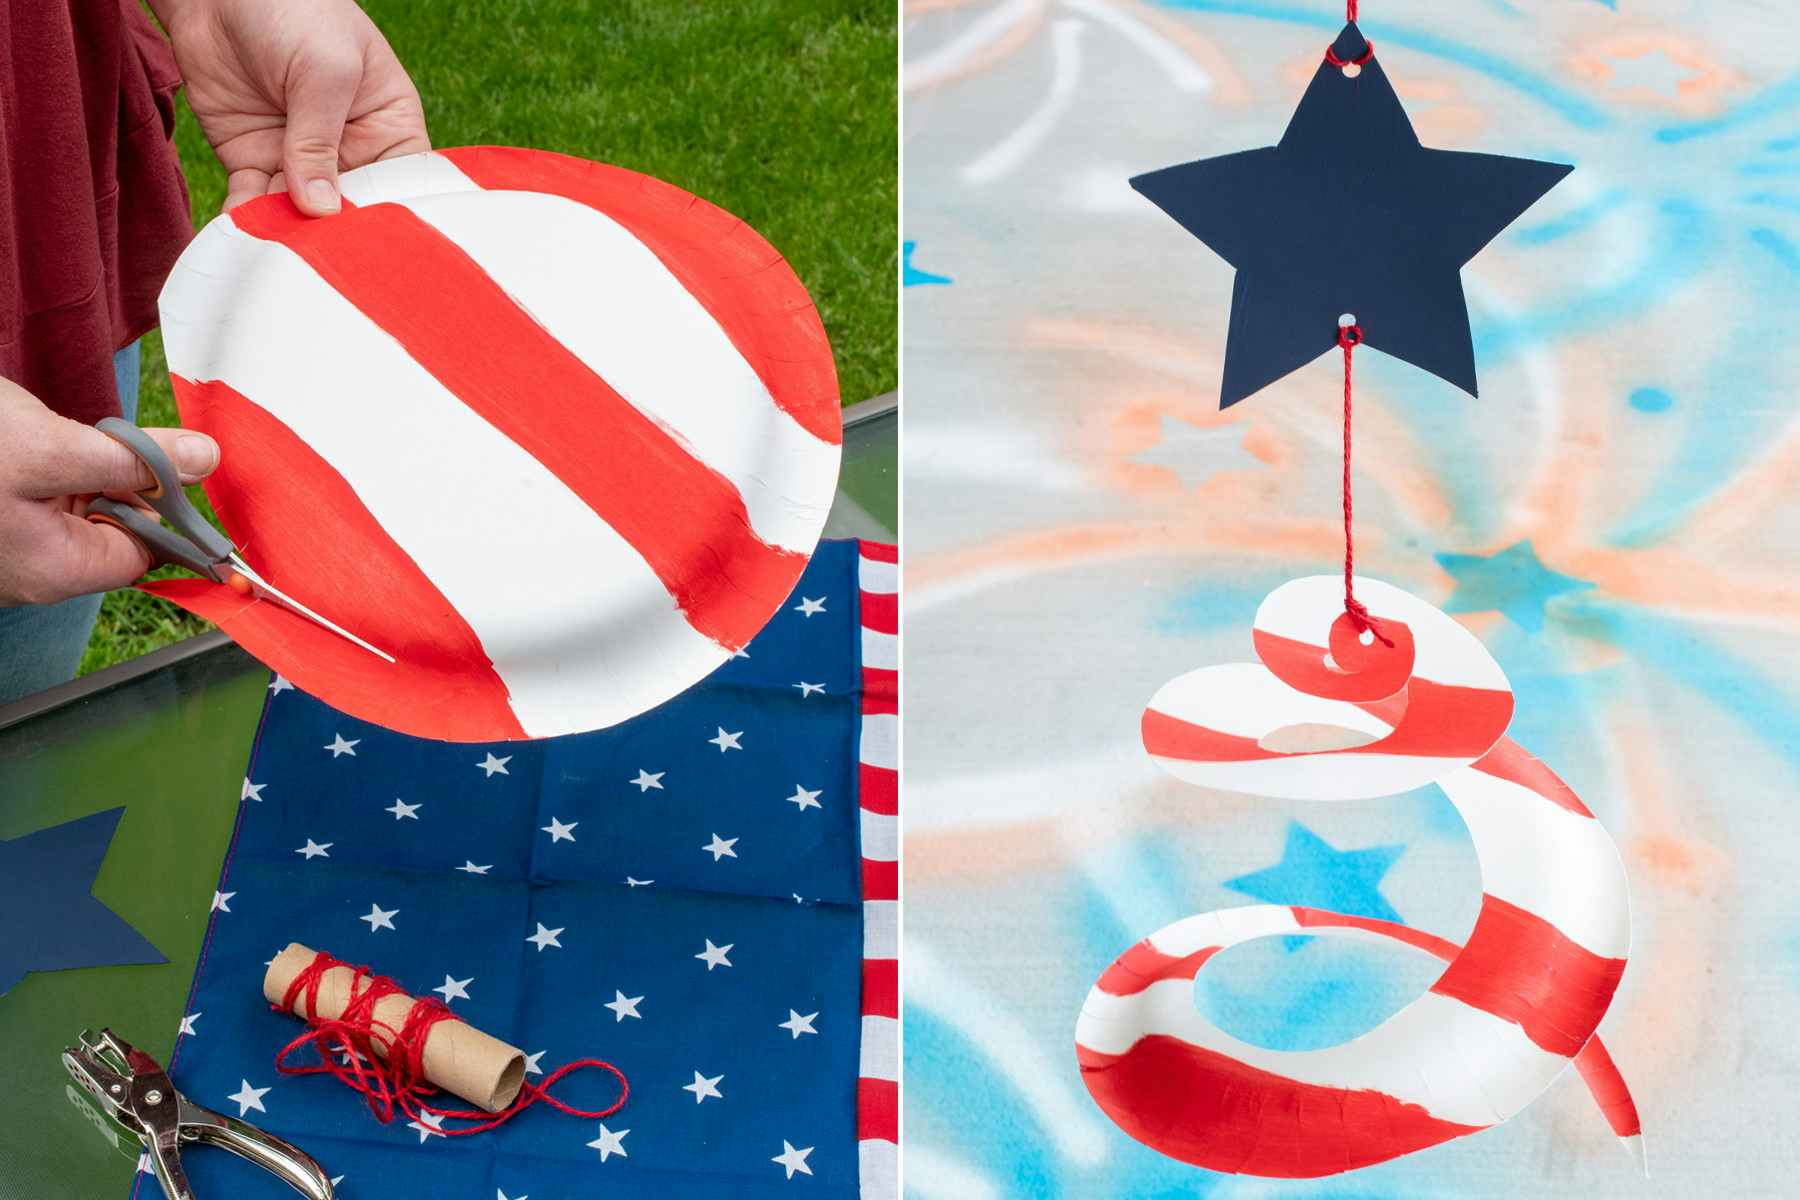 A person using scissors to cut a red-and-white-striped paper plate into a spiral, and a completed patriotic wind catcher with the striped spiral hanging down from a blue star.